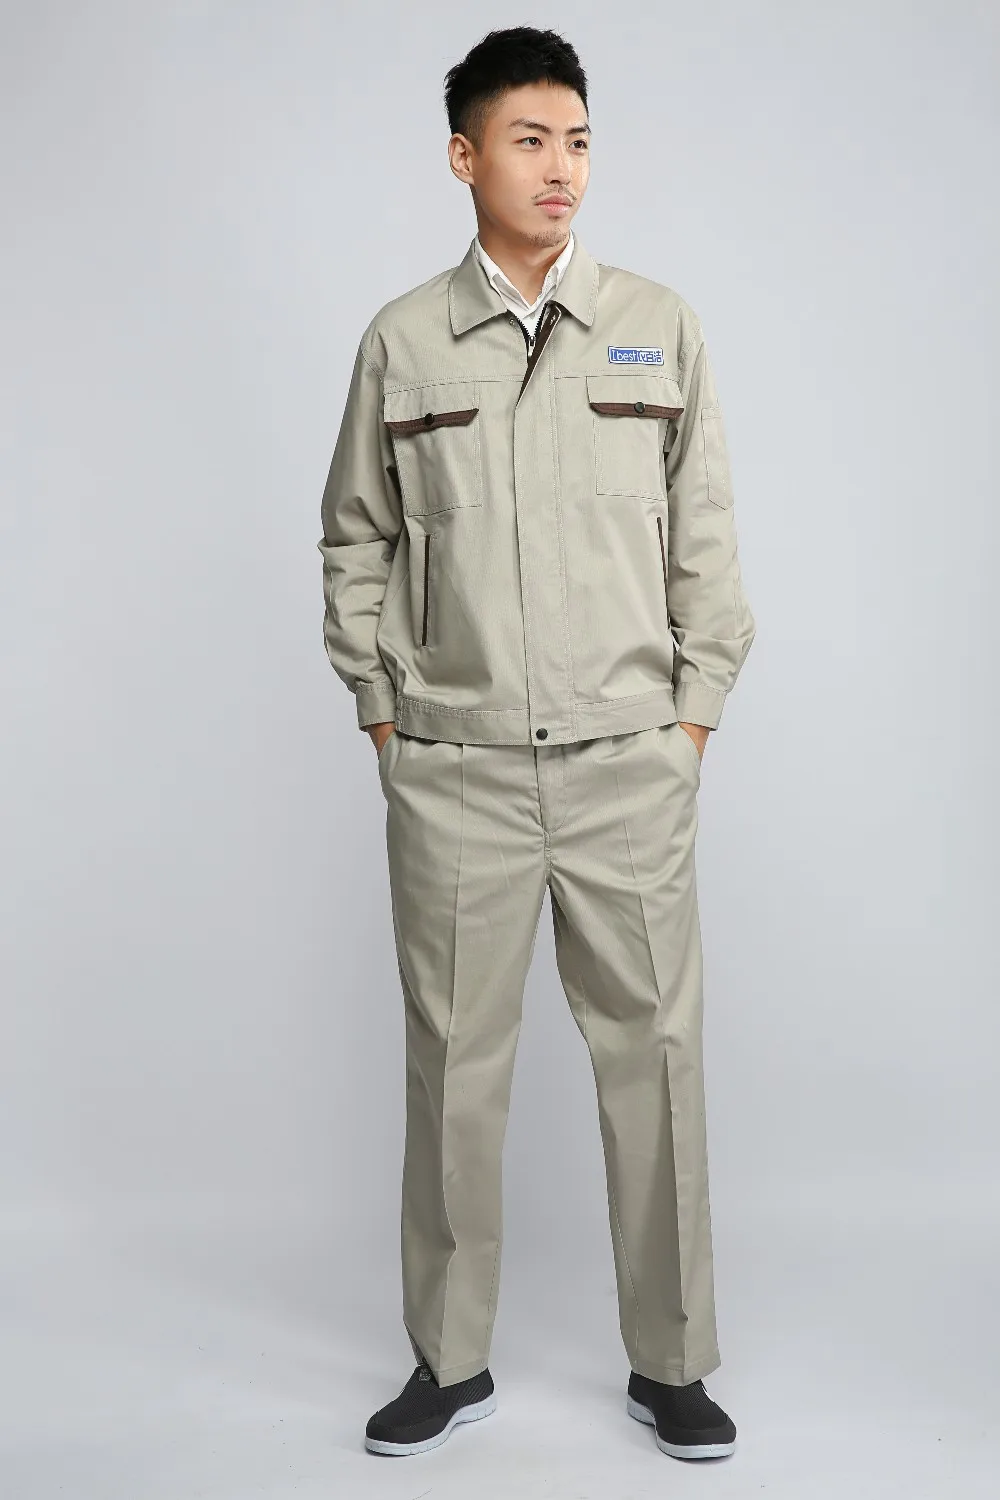 New Design Workwear Uniform Jacket And Pants Coverall Suits - Buy ...